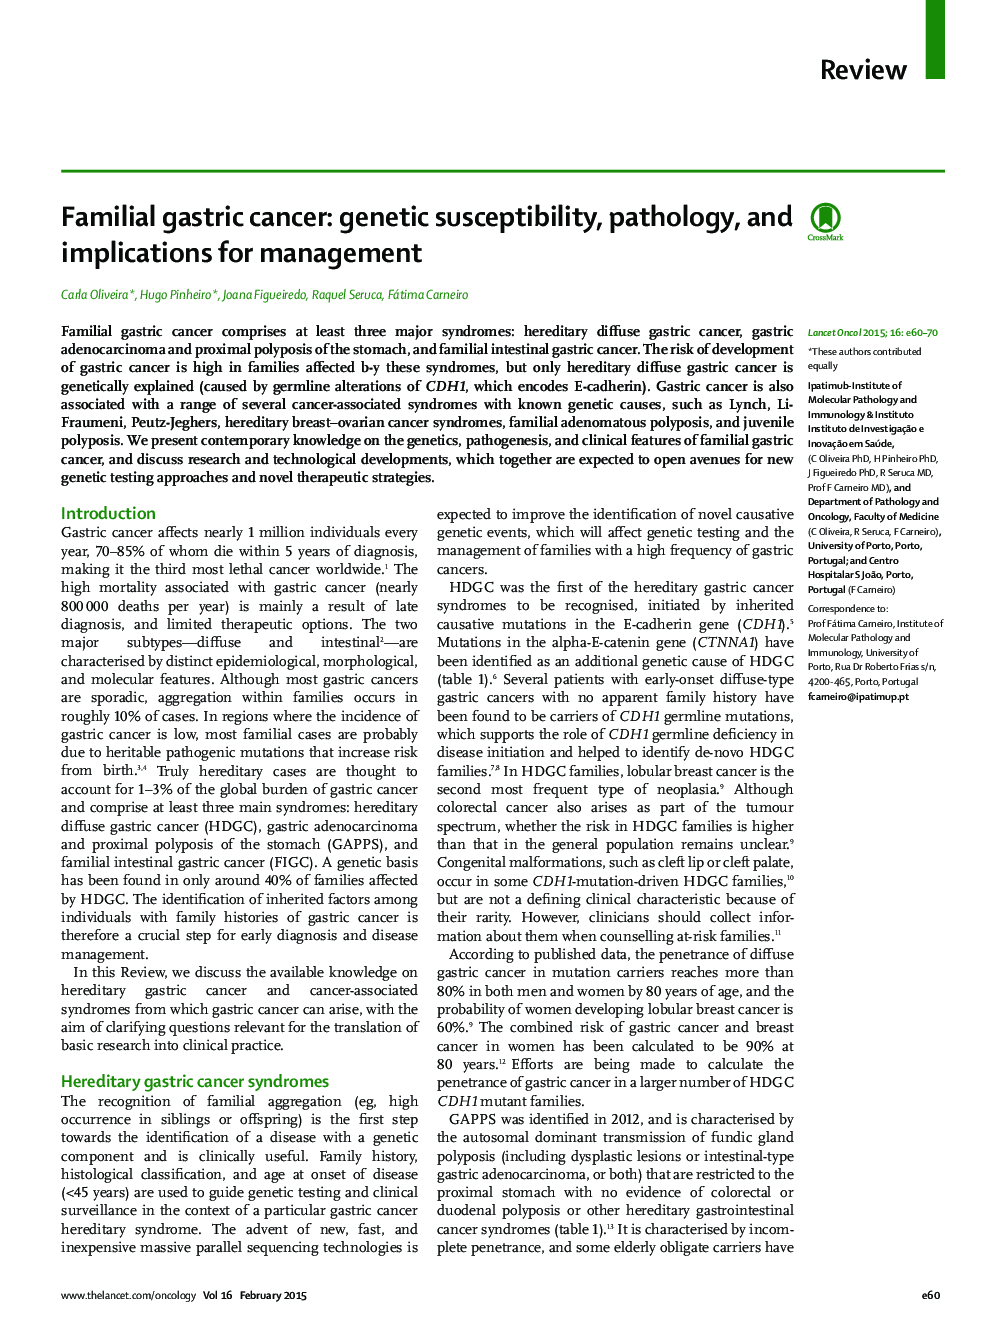 Familial gastric cancer: genetic susceptibility, pathology, and implications for management